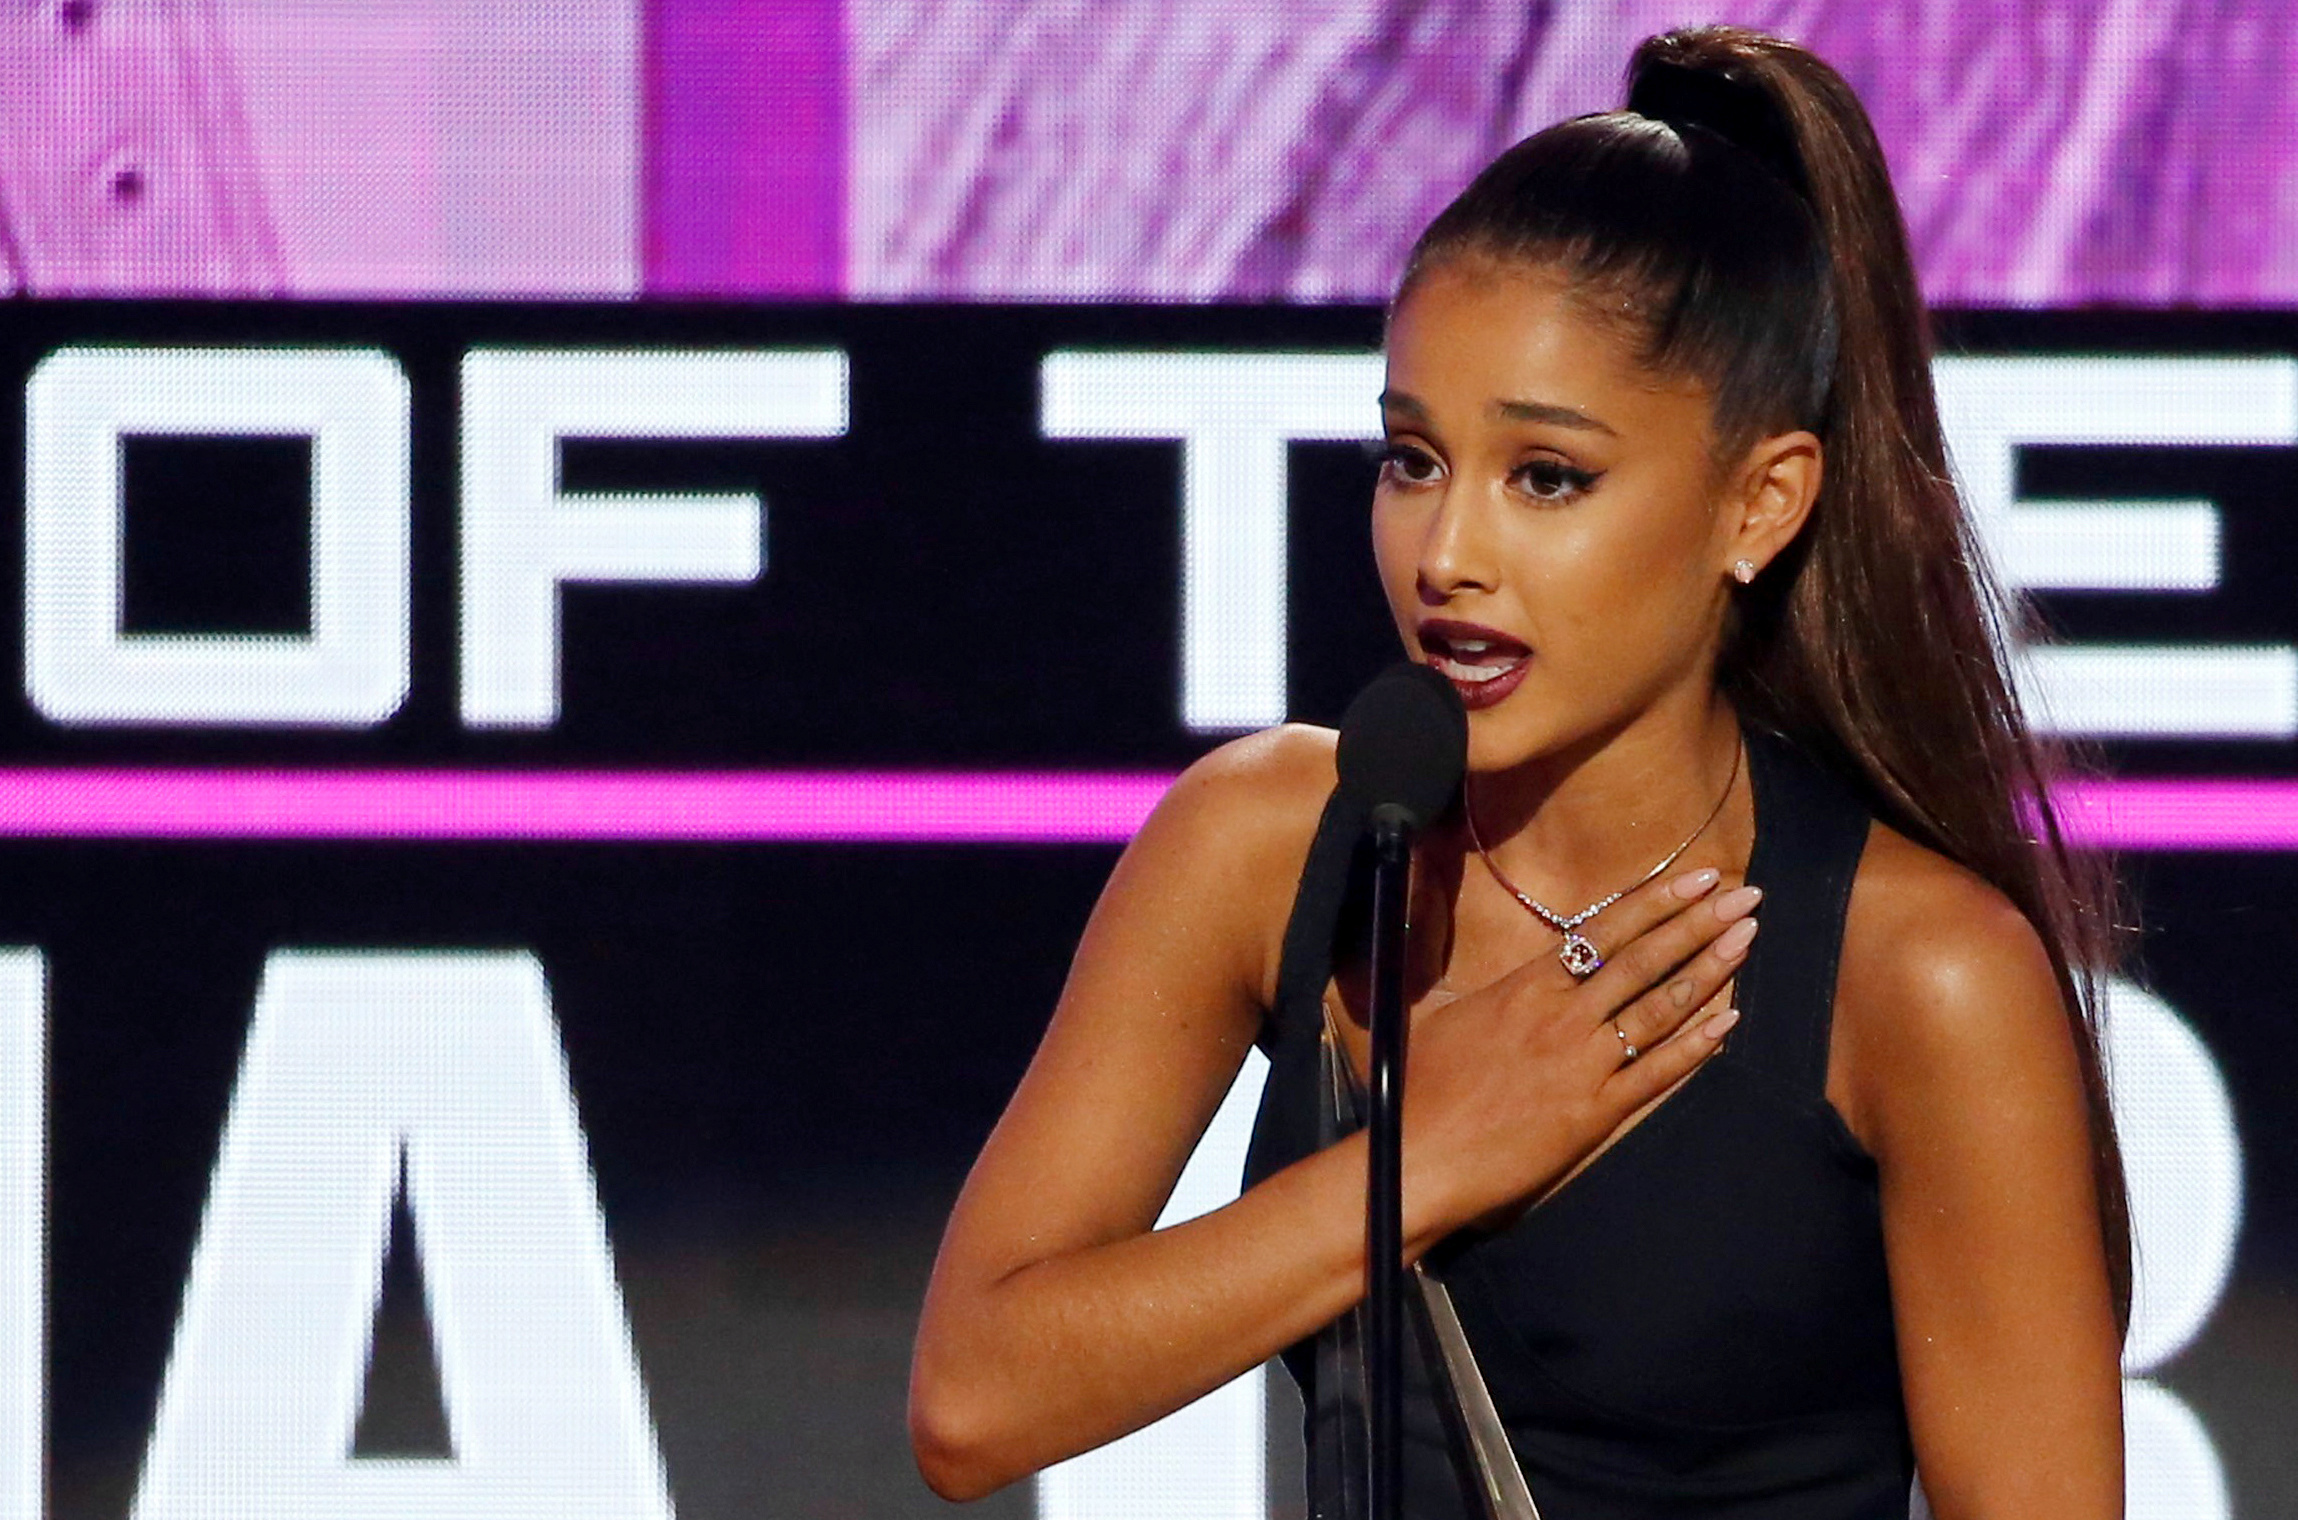 Grande accepts the award for artist of the year at the 2016 American Music Awards in Los Angeles